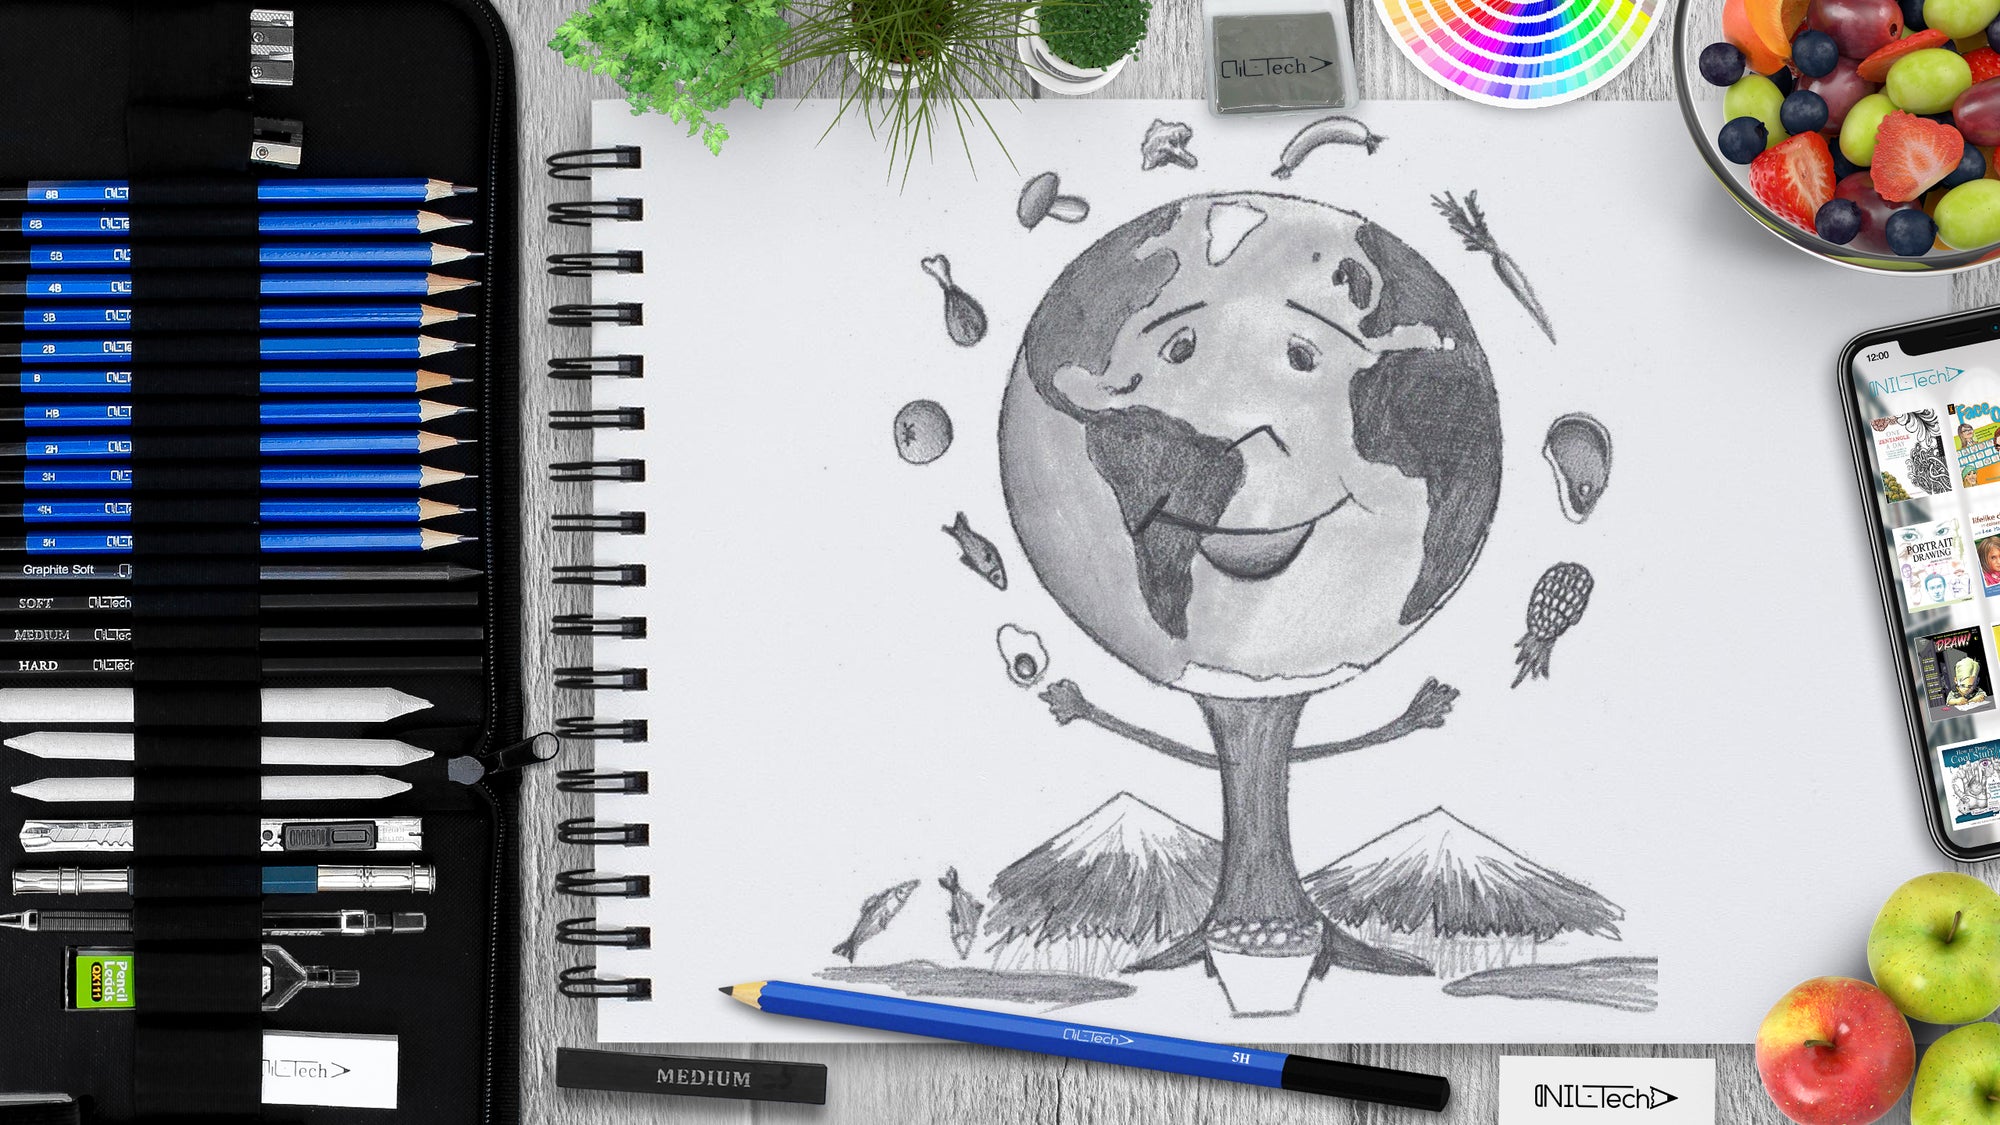 How to make world environment day drawing | World environment day poster |  Save nature drawing easy - YouTube